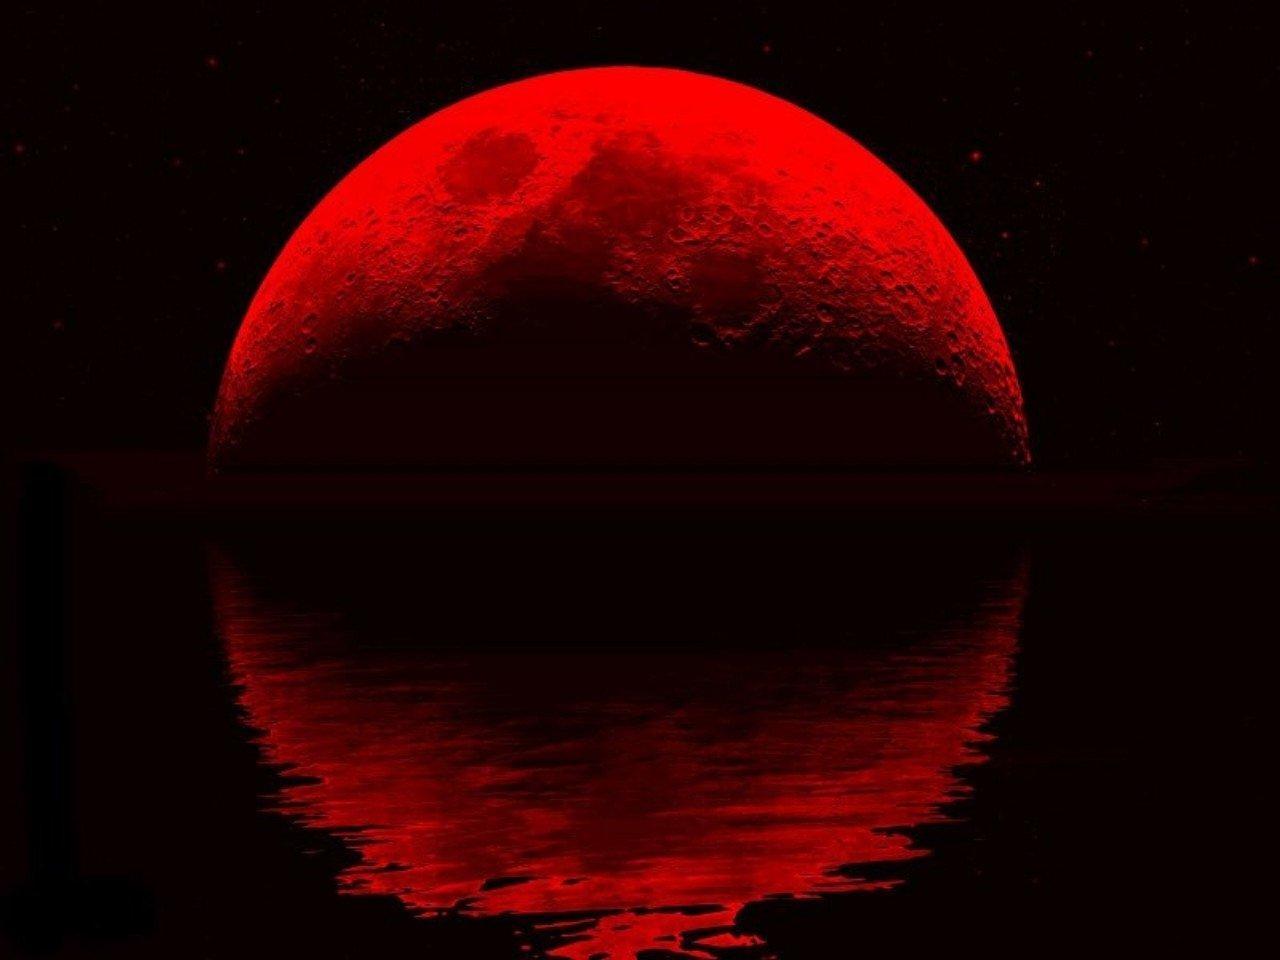 Blood Red Moon Wallpapers on WallpaperDog